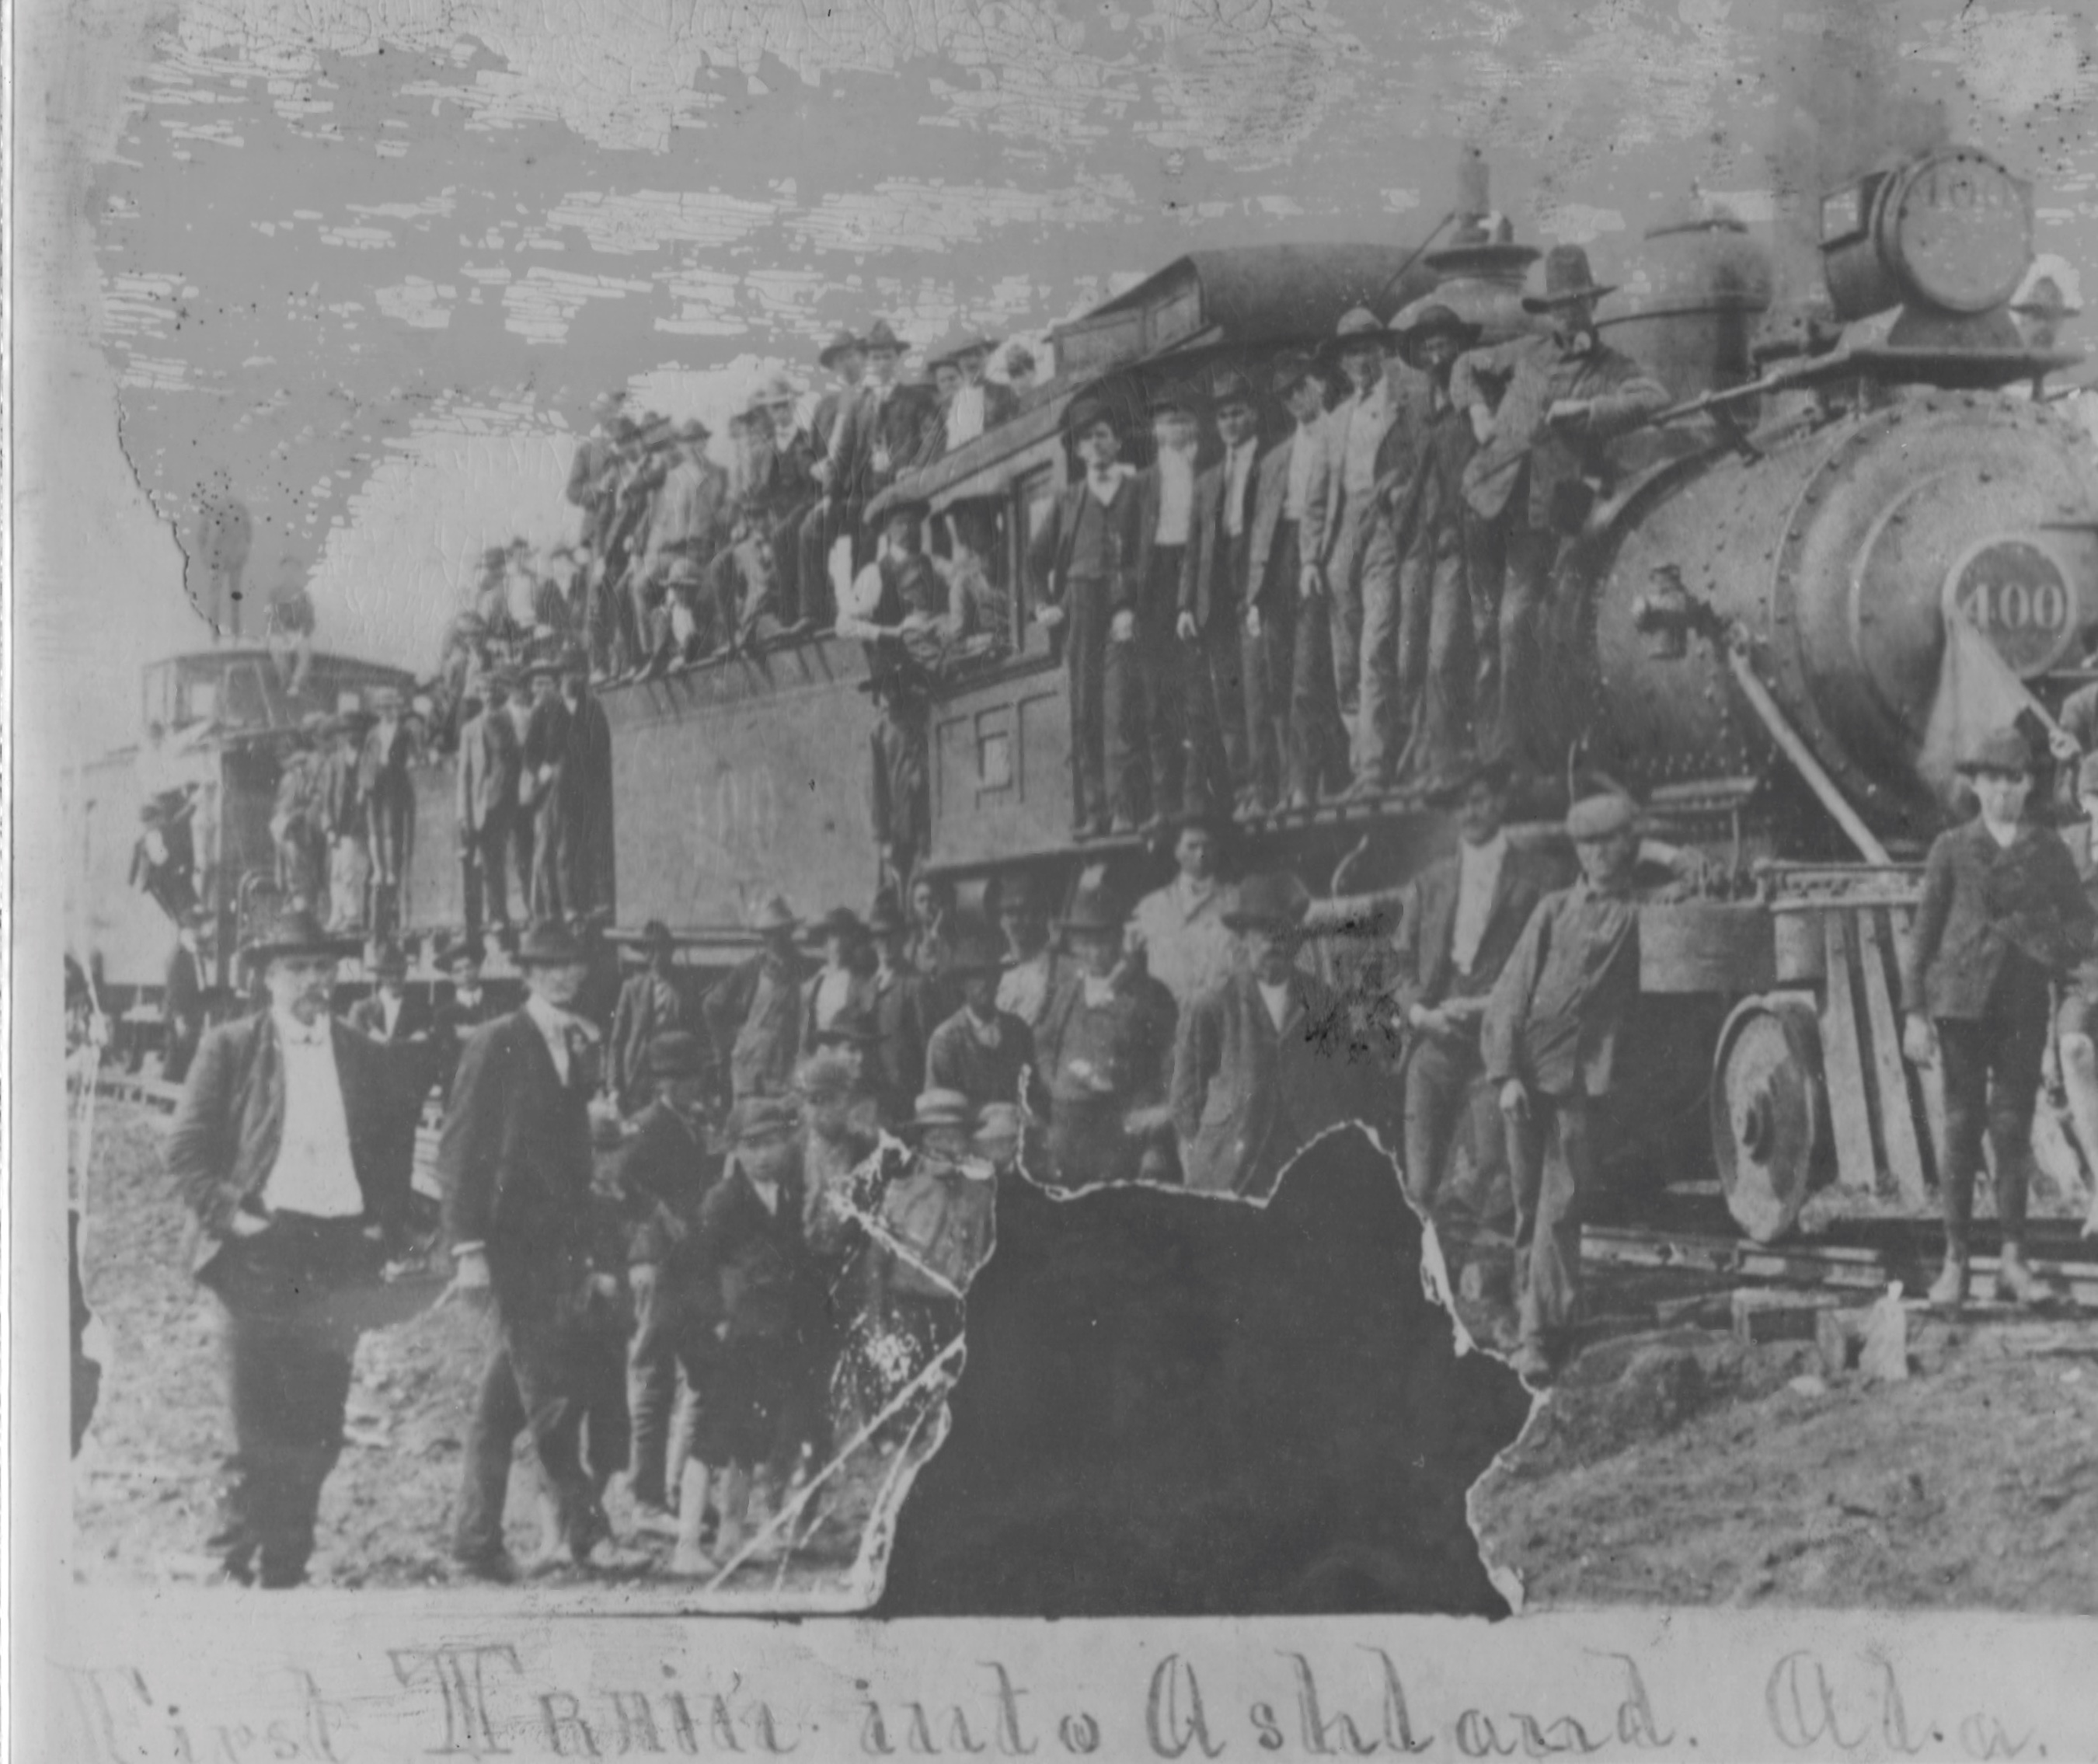 Train surrounded by passengers.